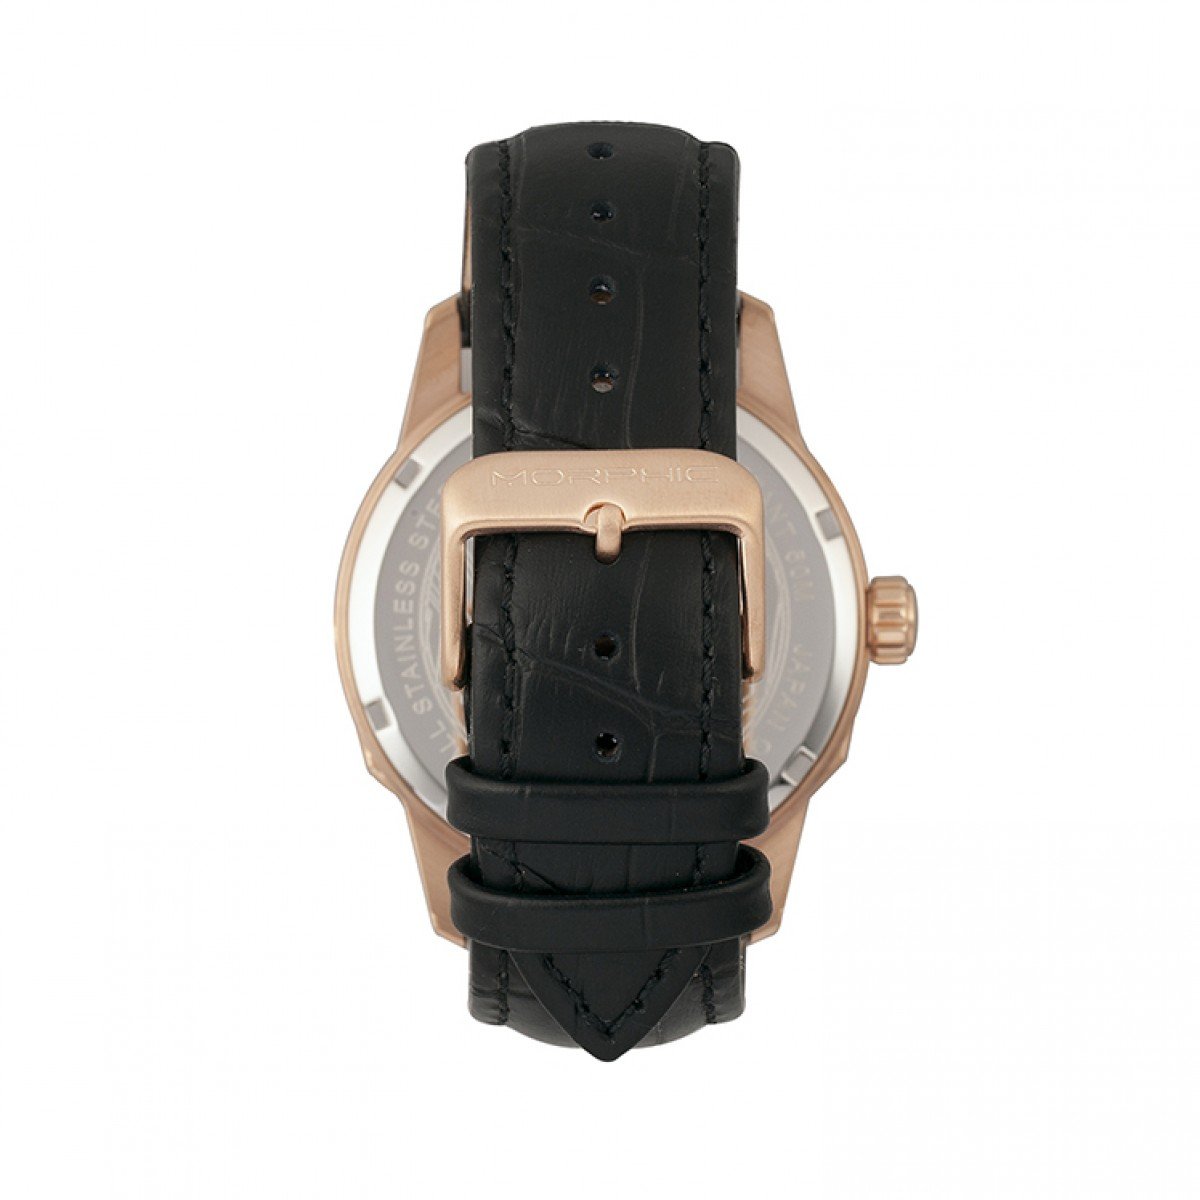 Morphic M56 Series Leather-Band Watch w/Date - Rose Gold/Black - MPH5604